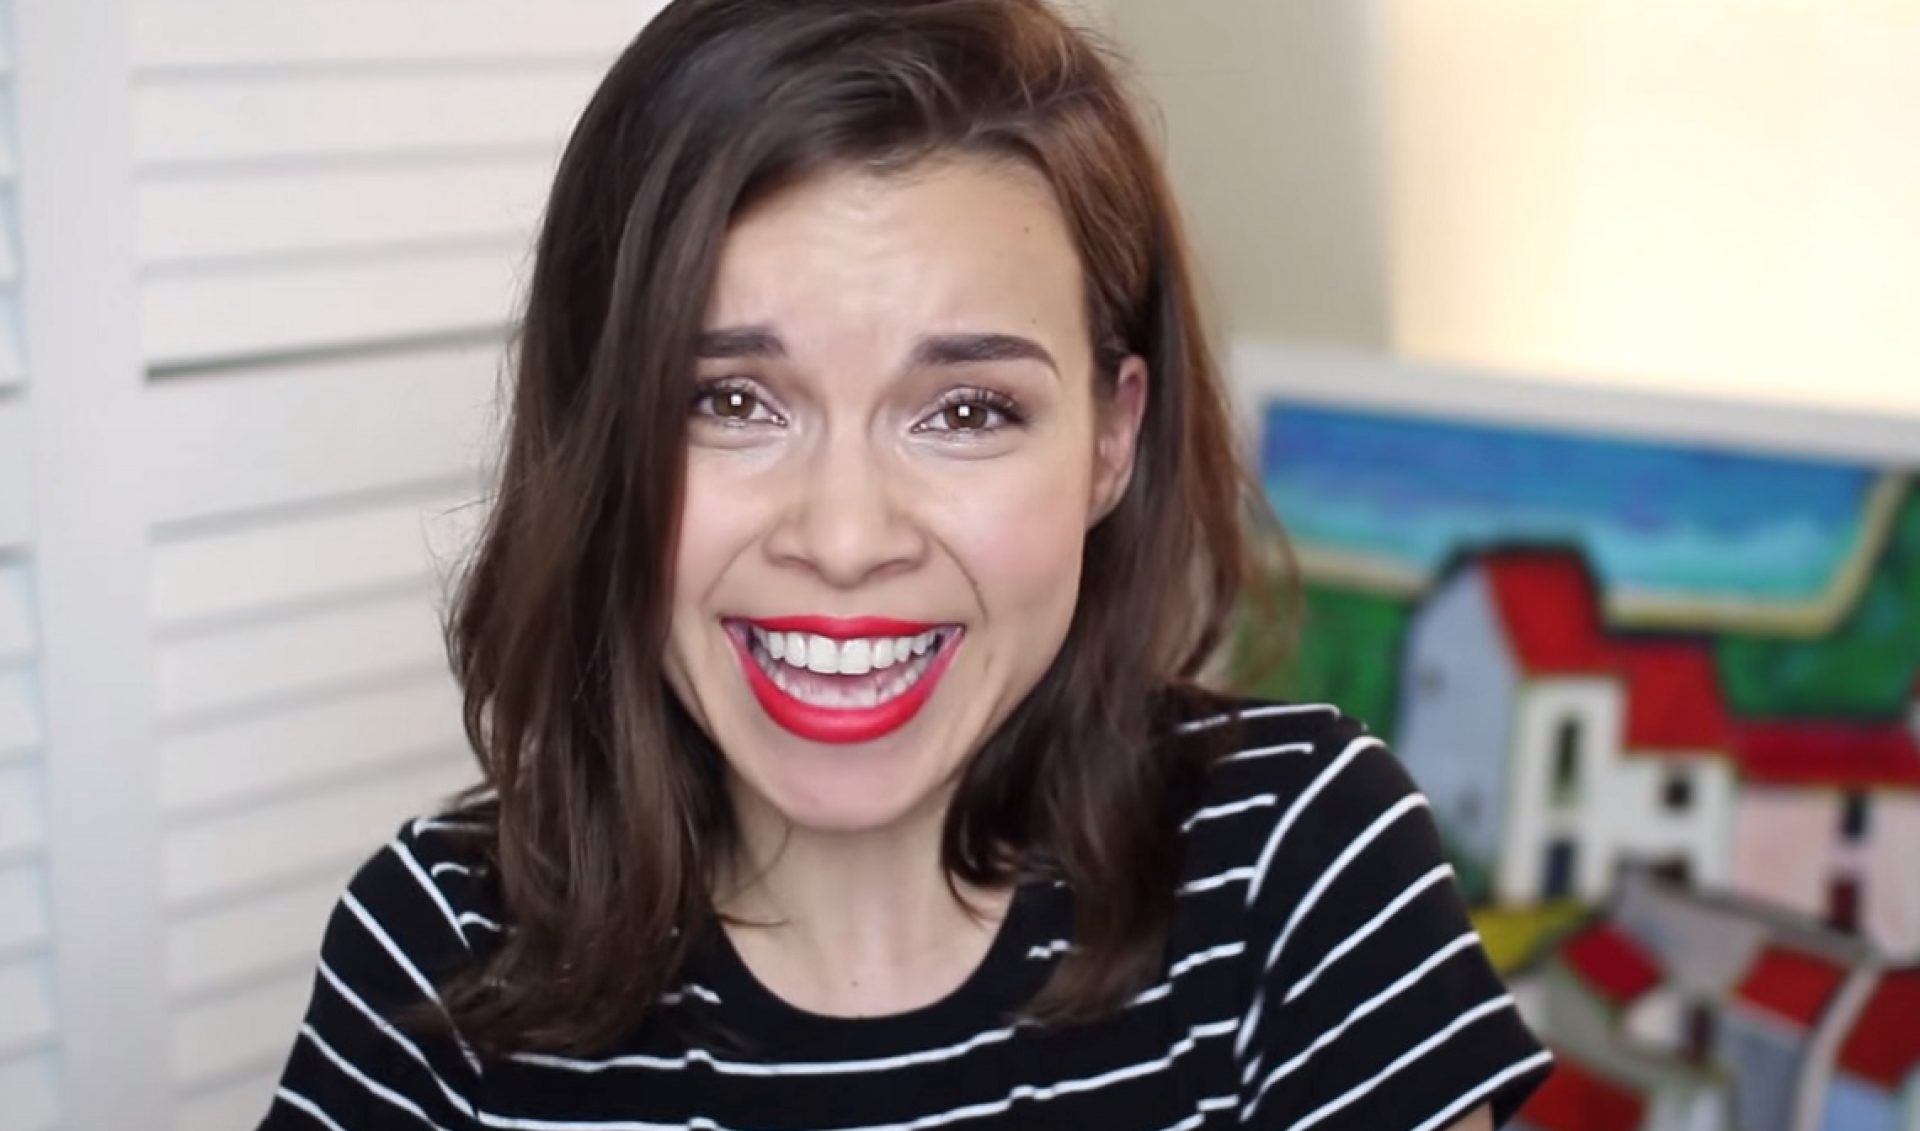 YouTube Star Ingrid Nilsen Comes Out, Receives Support From YouTube Community